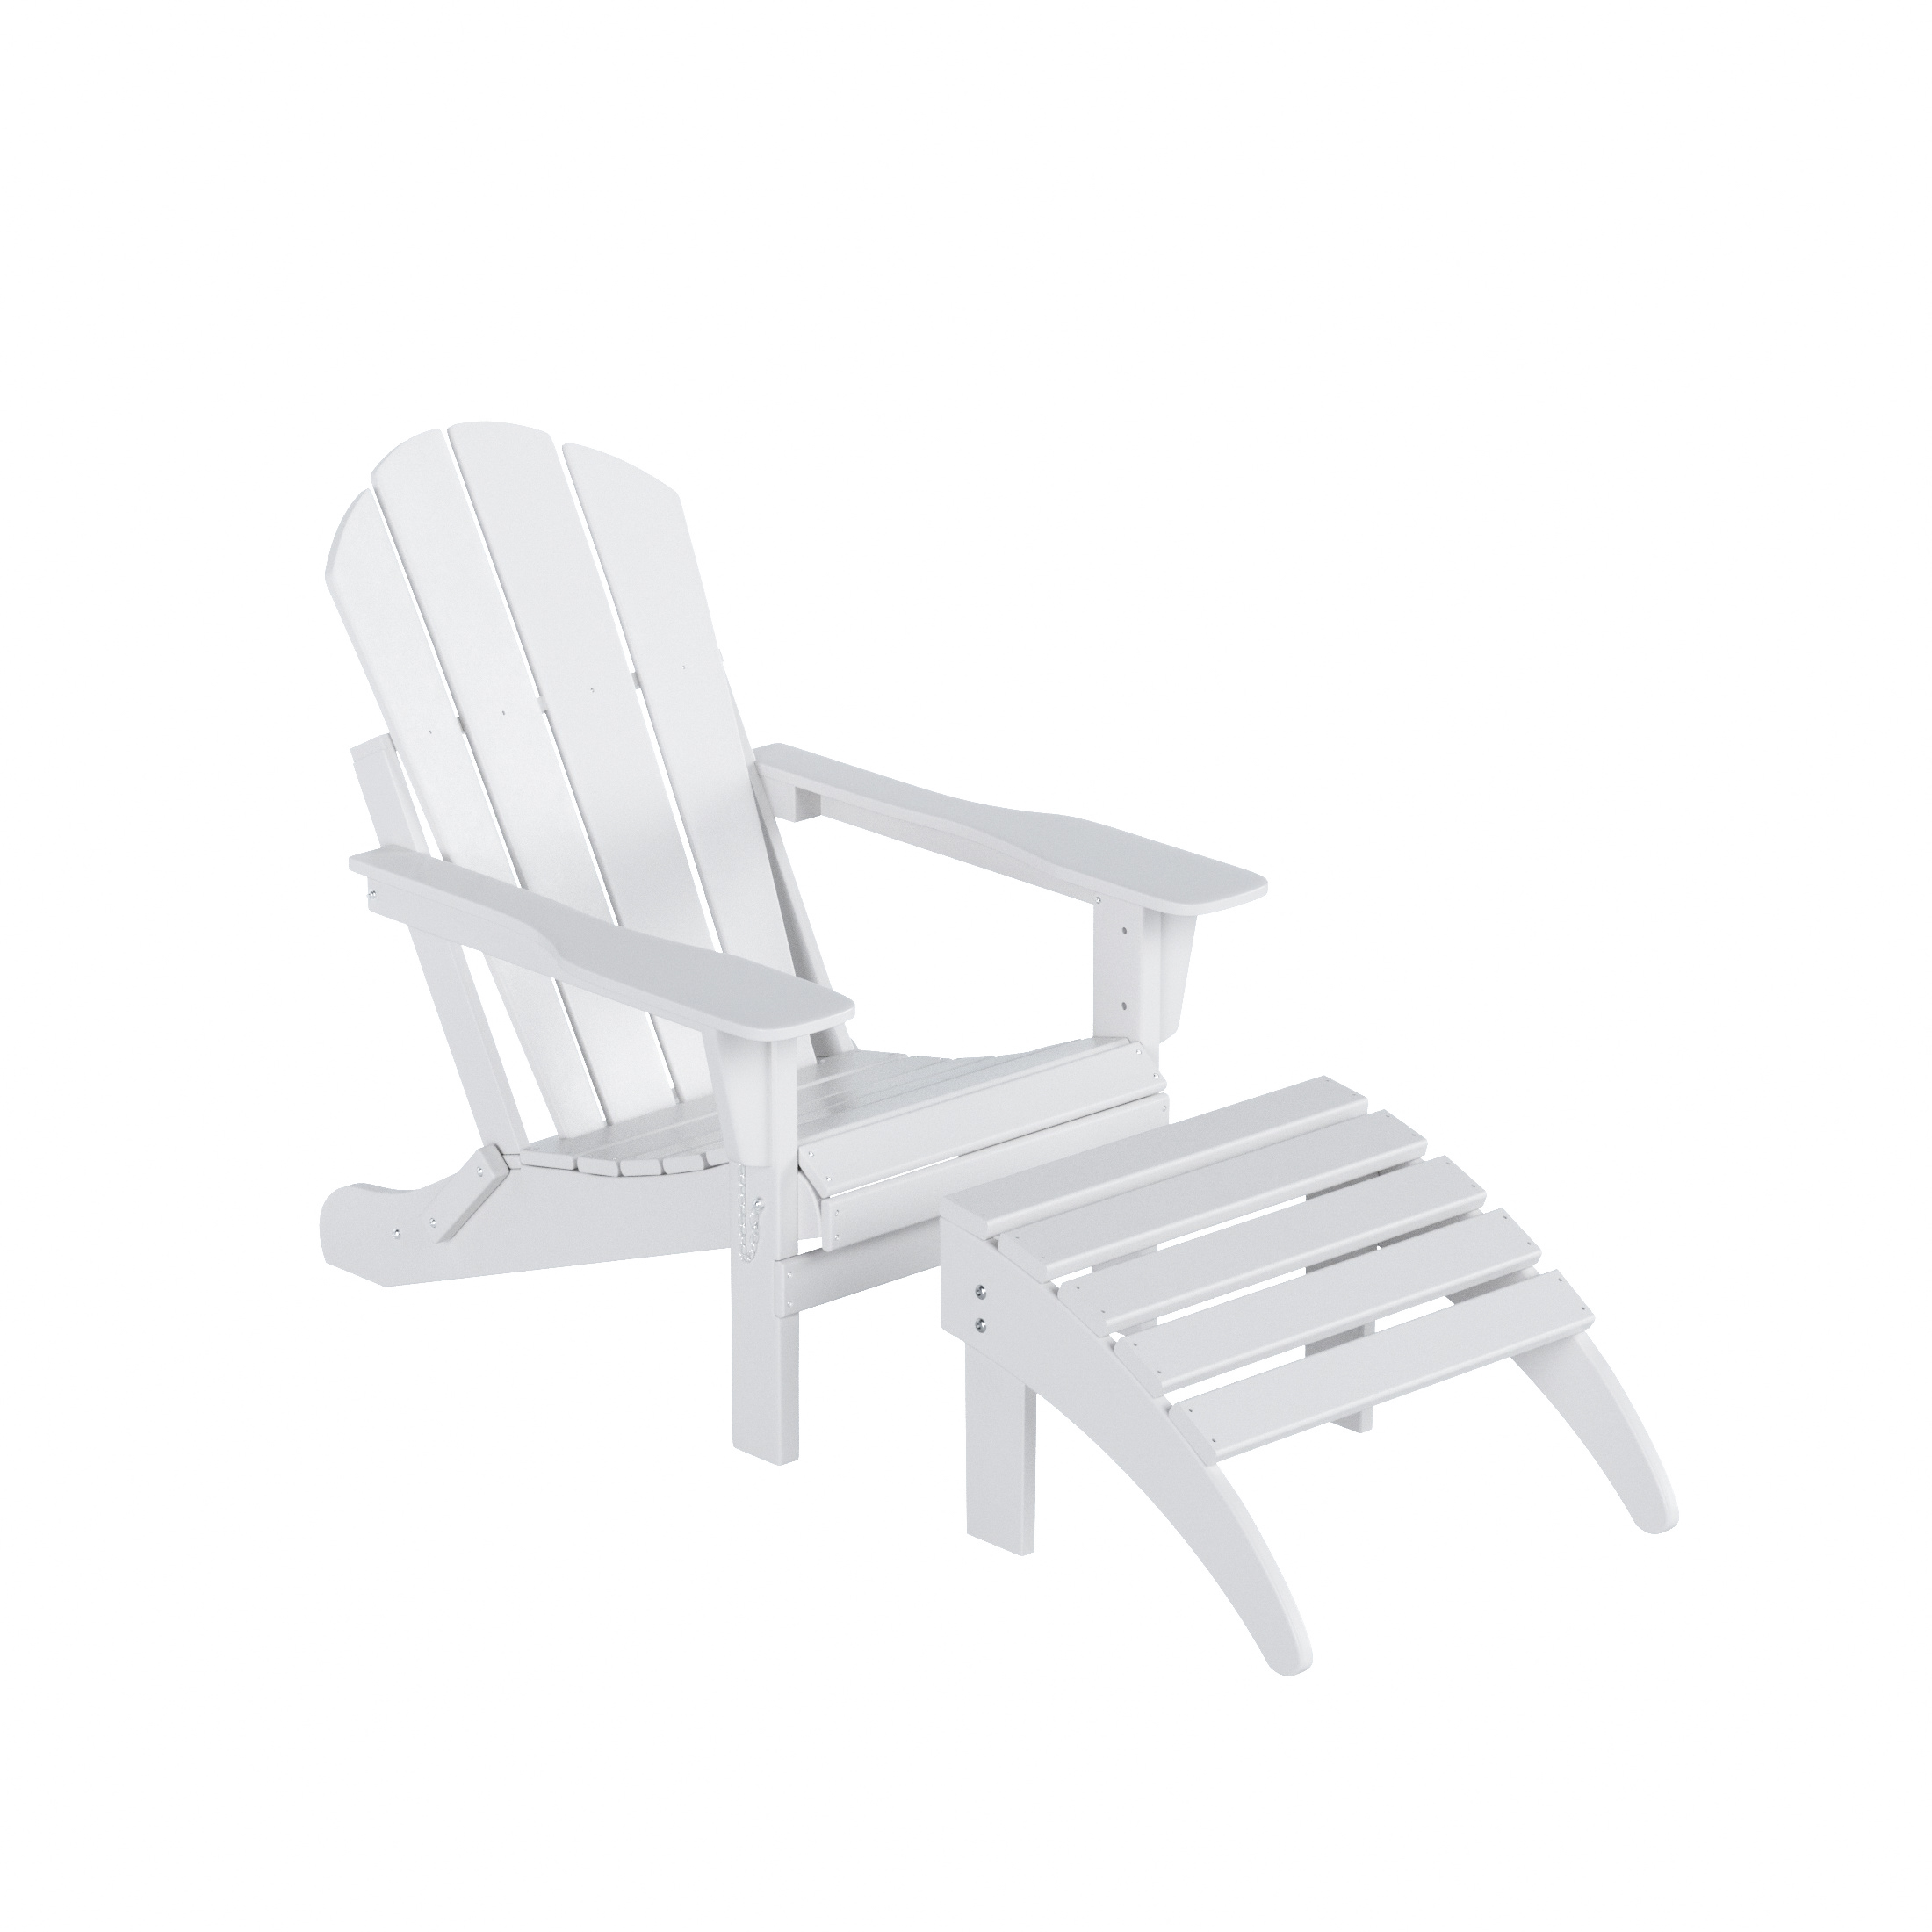 WestinTrends Malibu Outdoor Lounge Chair, 2-Pieces Adirondack Chair Set with Ottoman, All Weather Poly Lumber Patio Lawn Folding Chairs for Outside Pool Garden Backyard Beach, White - image 1 of 6